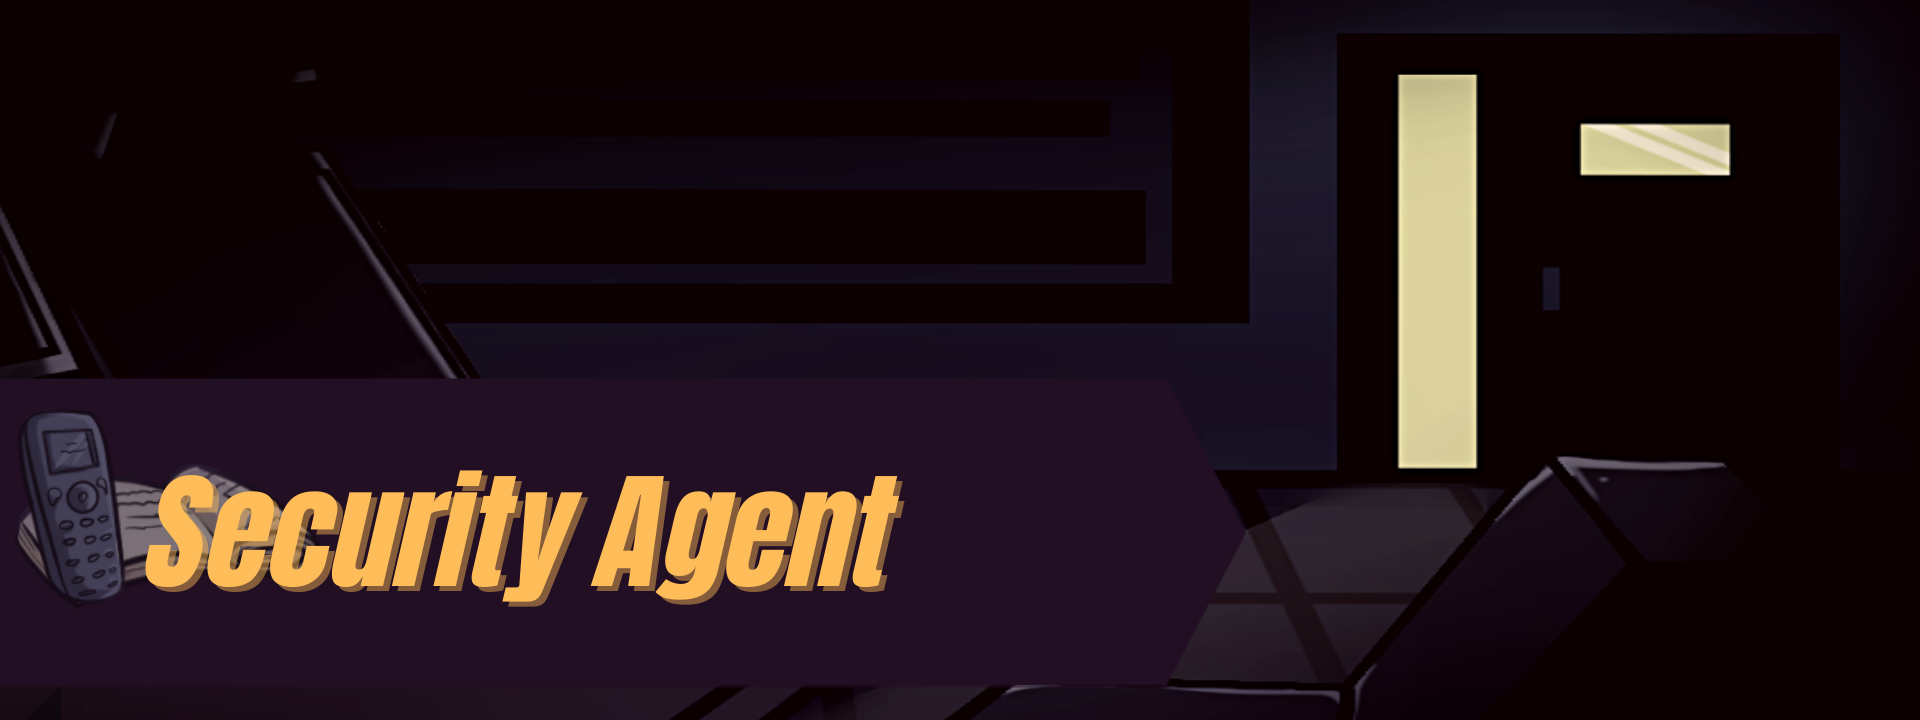 Security Agent